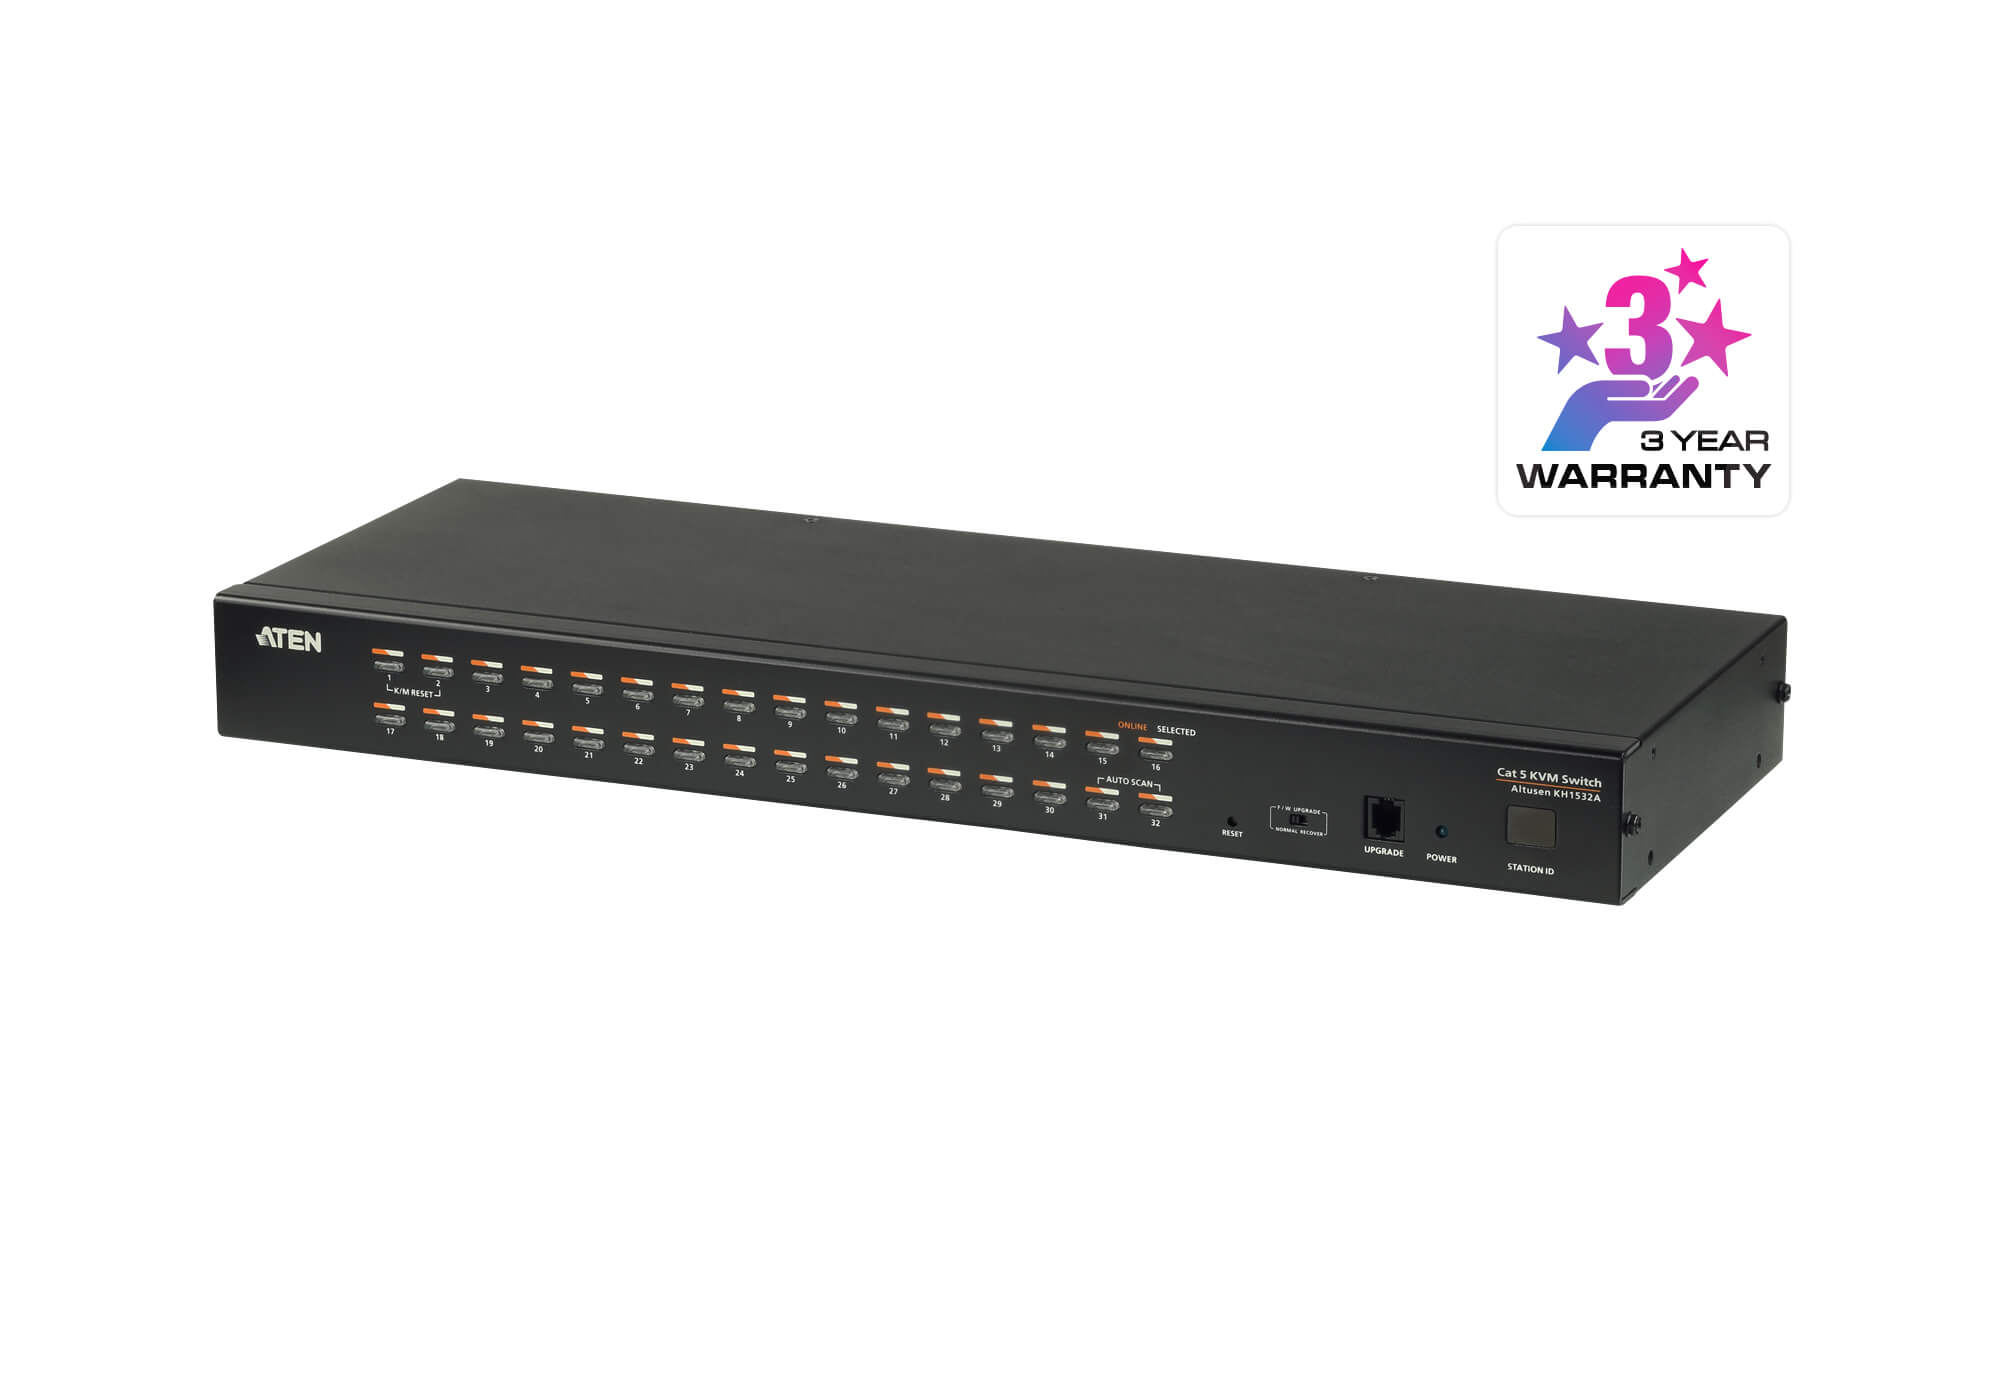 Aten Rackmount KVM Switch 1 Console 32 Port Multi-Interface Cat 5, KVM Cables NOT Included, Daisy Chainable for up to 1024 Devices,